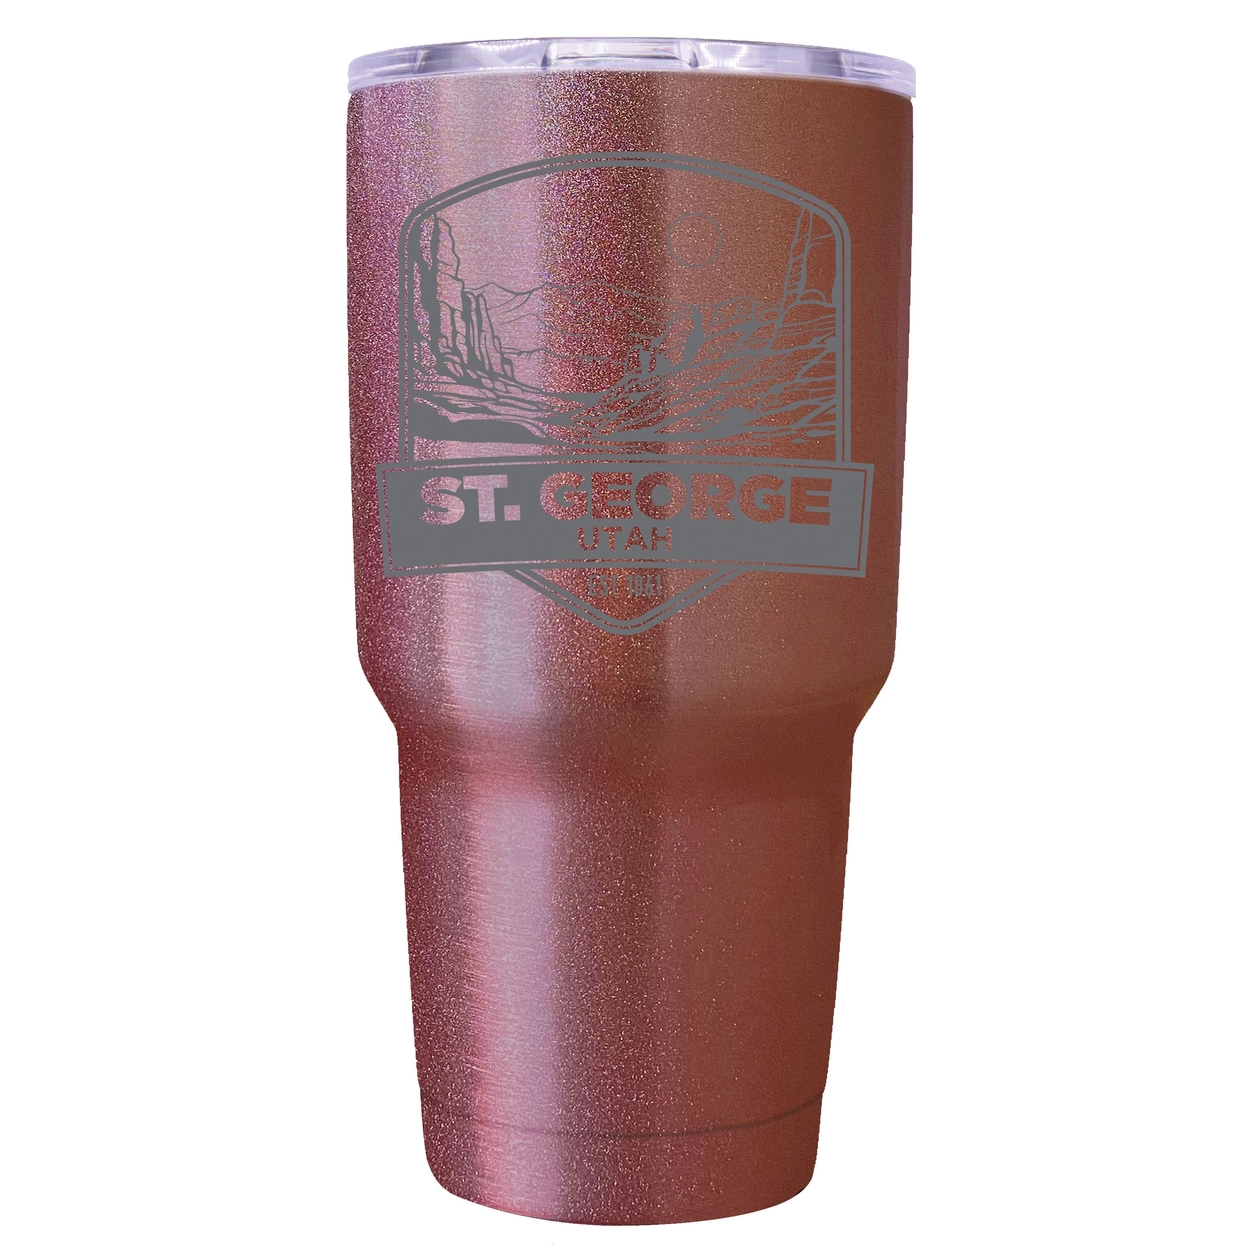 St. George Utah Souvenir 24 Oz Engraved Insulated Stainless Steel Tumbler - Rose Gold,,2-Pack